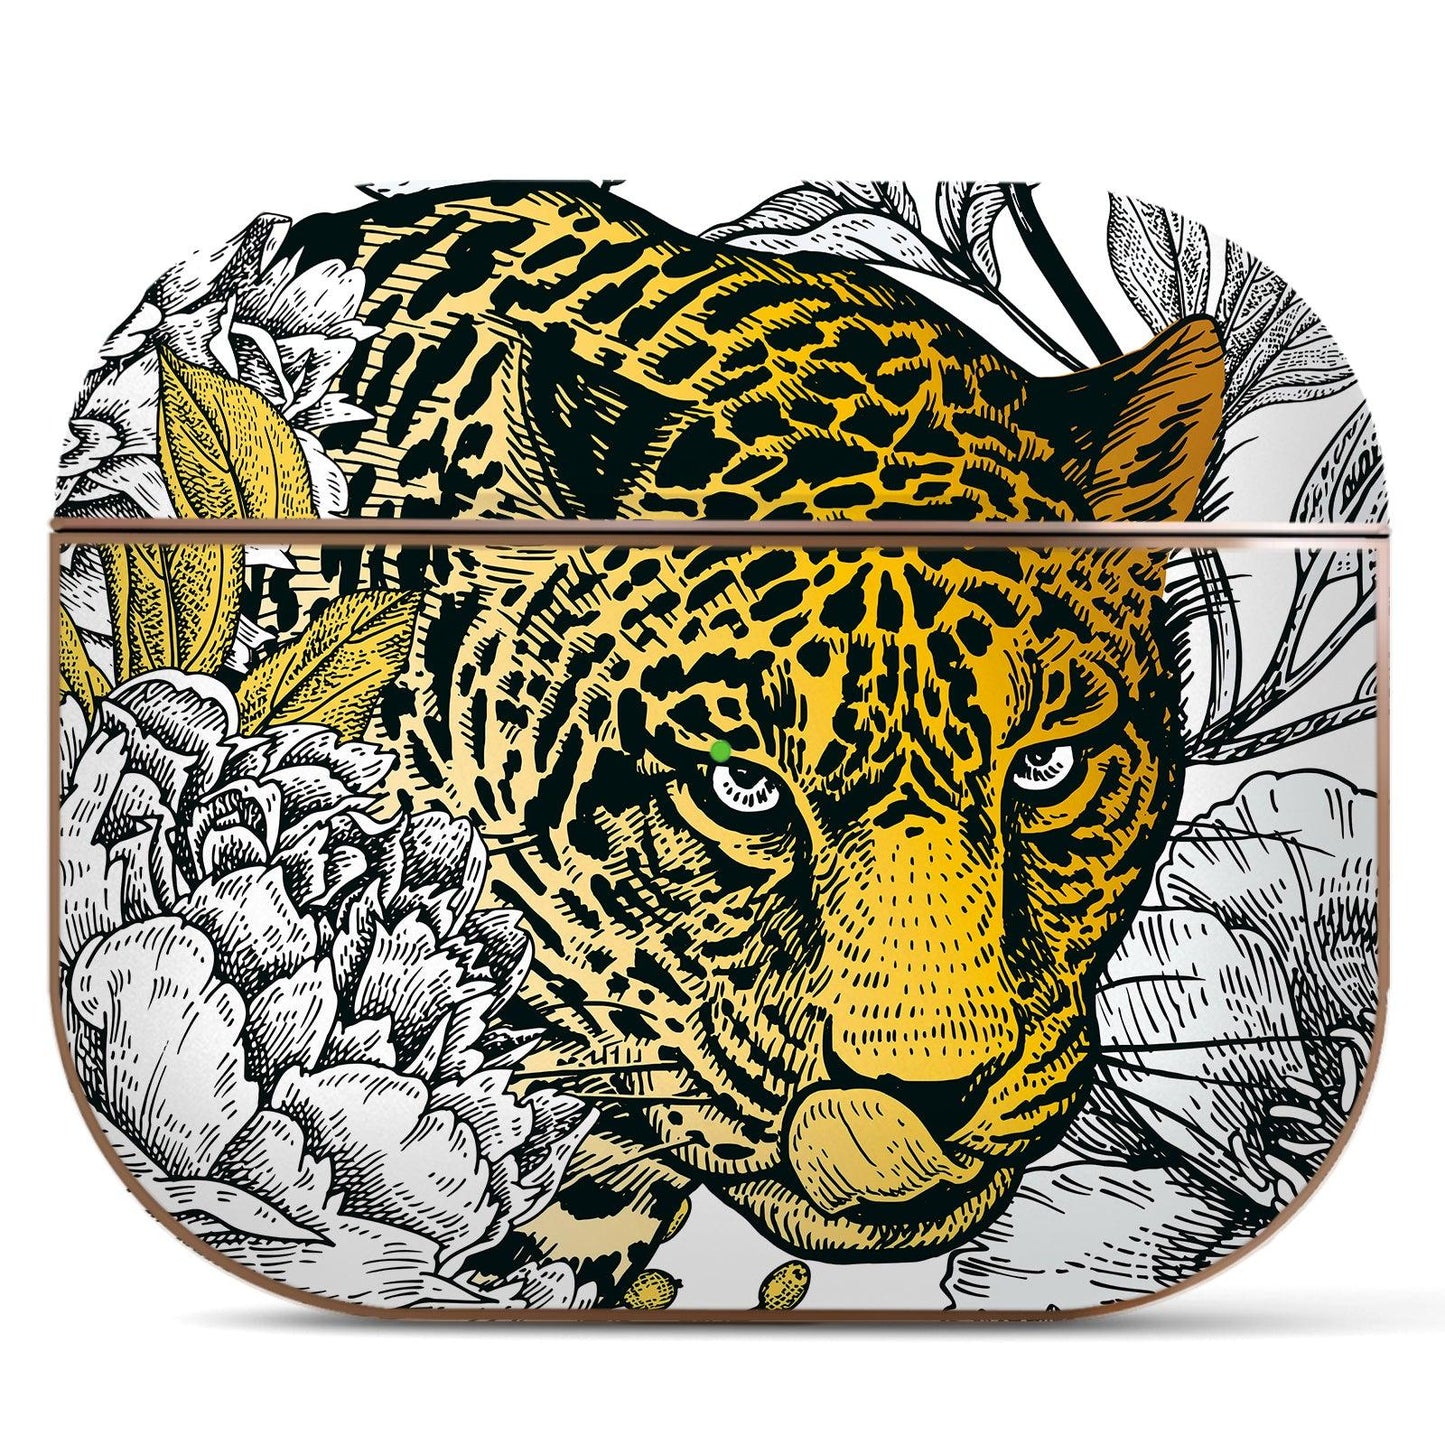 AirPods Pro 1st Generation Contemporary Cover, Leopard and Peonies - Berkin Arts